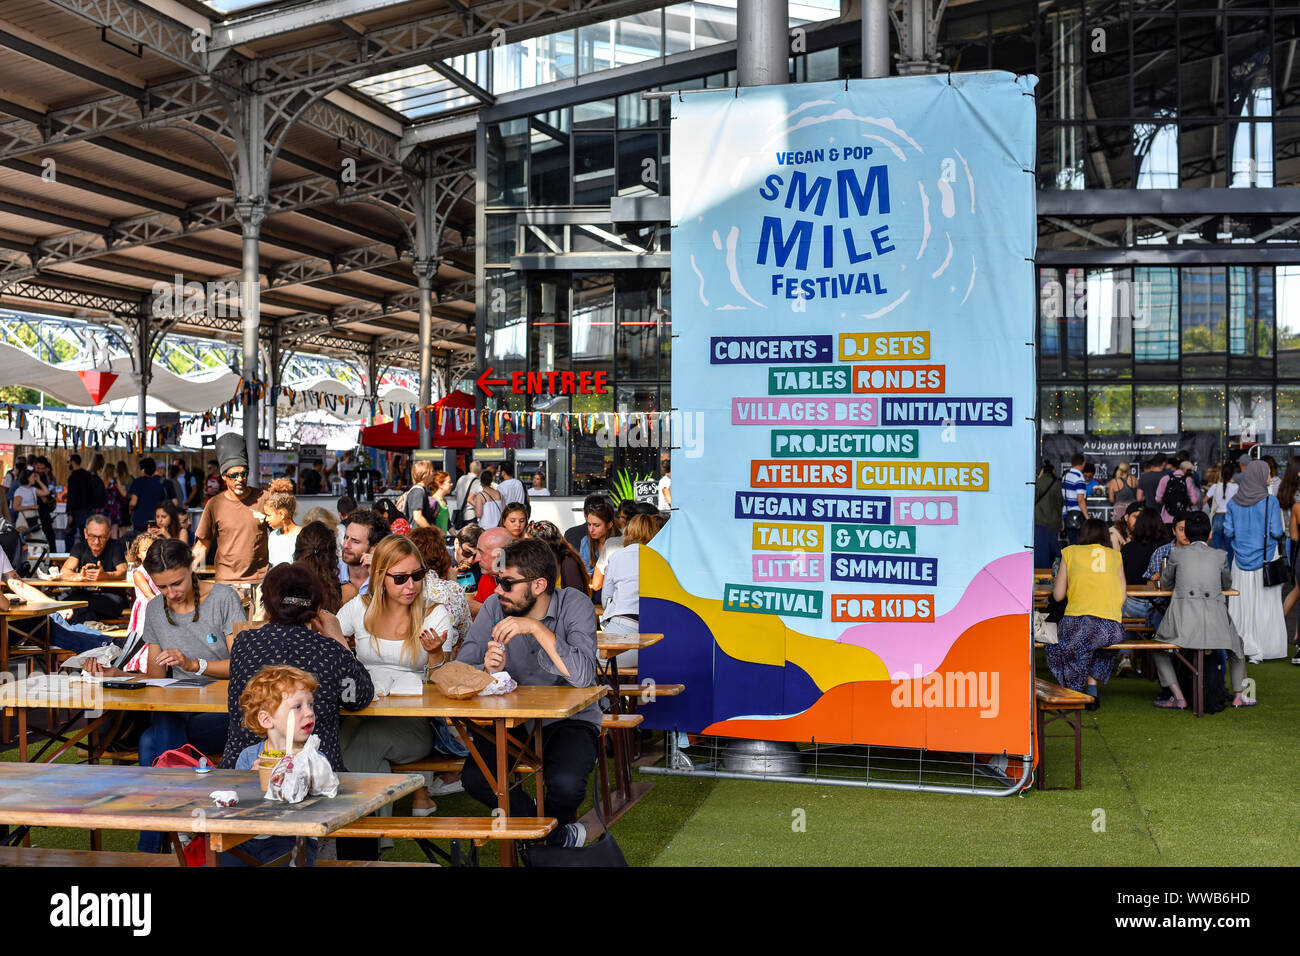 PARIS, FRANCE - SEPTEMBER 14, 2019: Many visitors enjoying a lunch for the vegan and pop SMMMILE festival held in the Parc de la Villette. Stock Photo